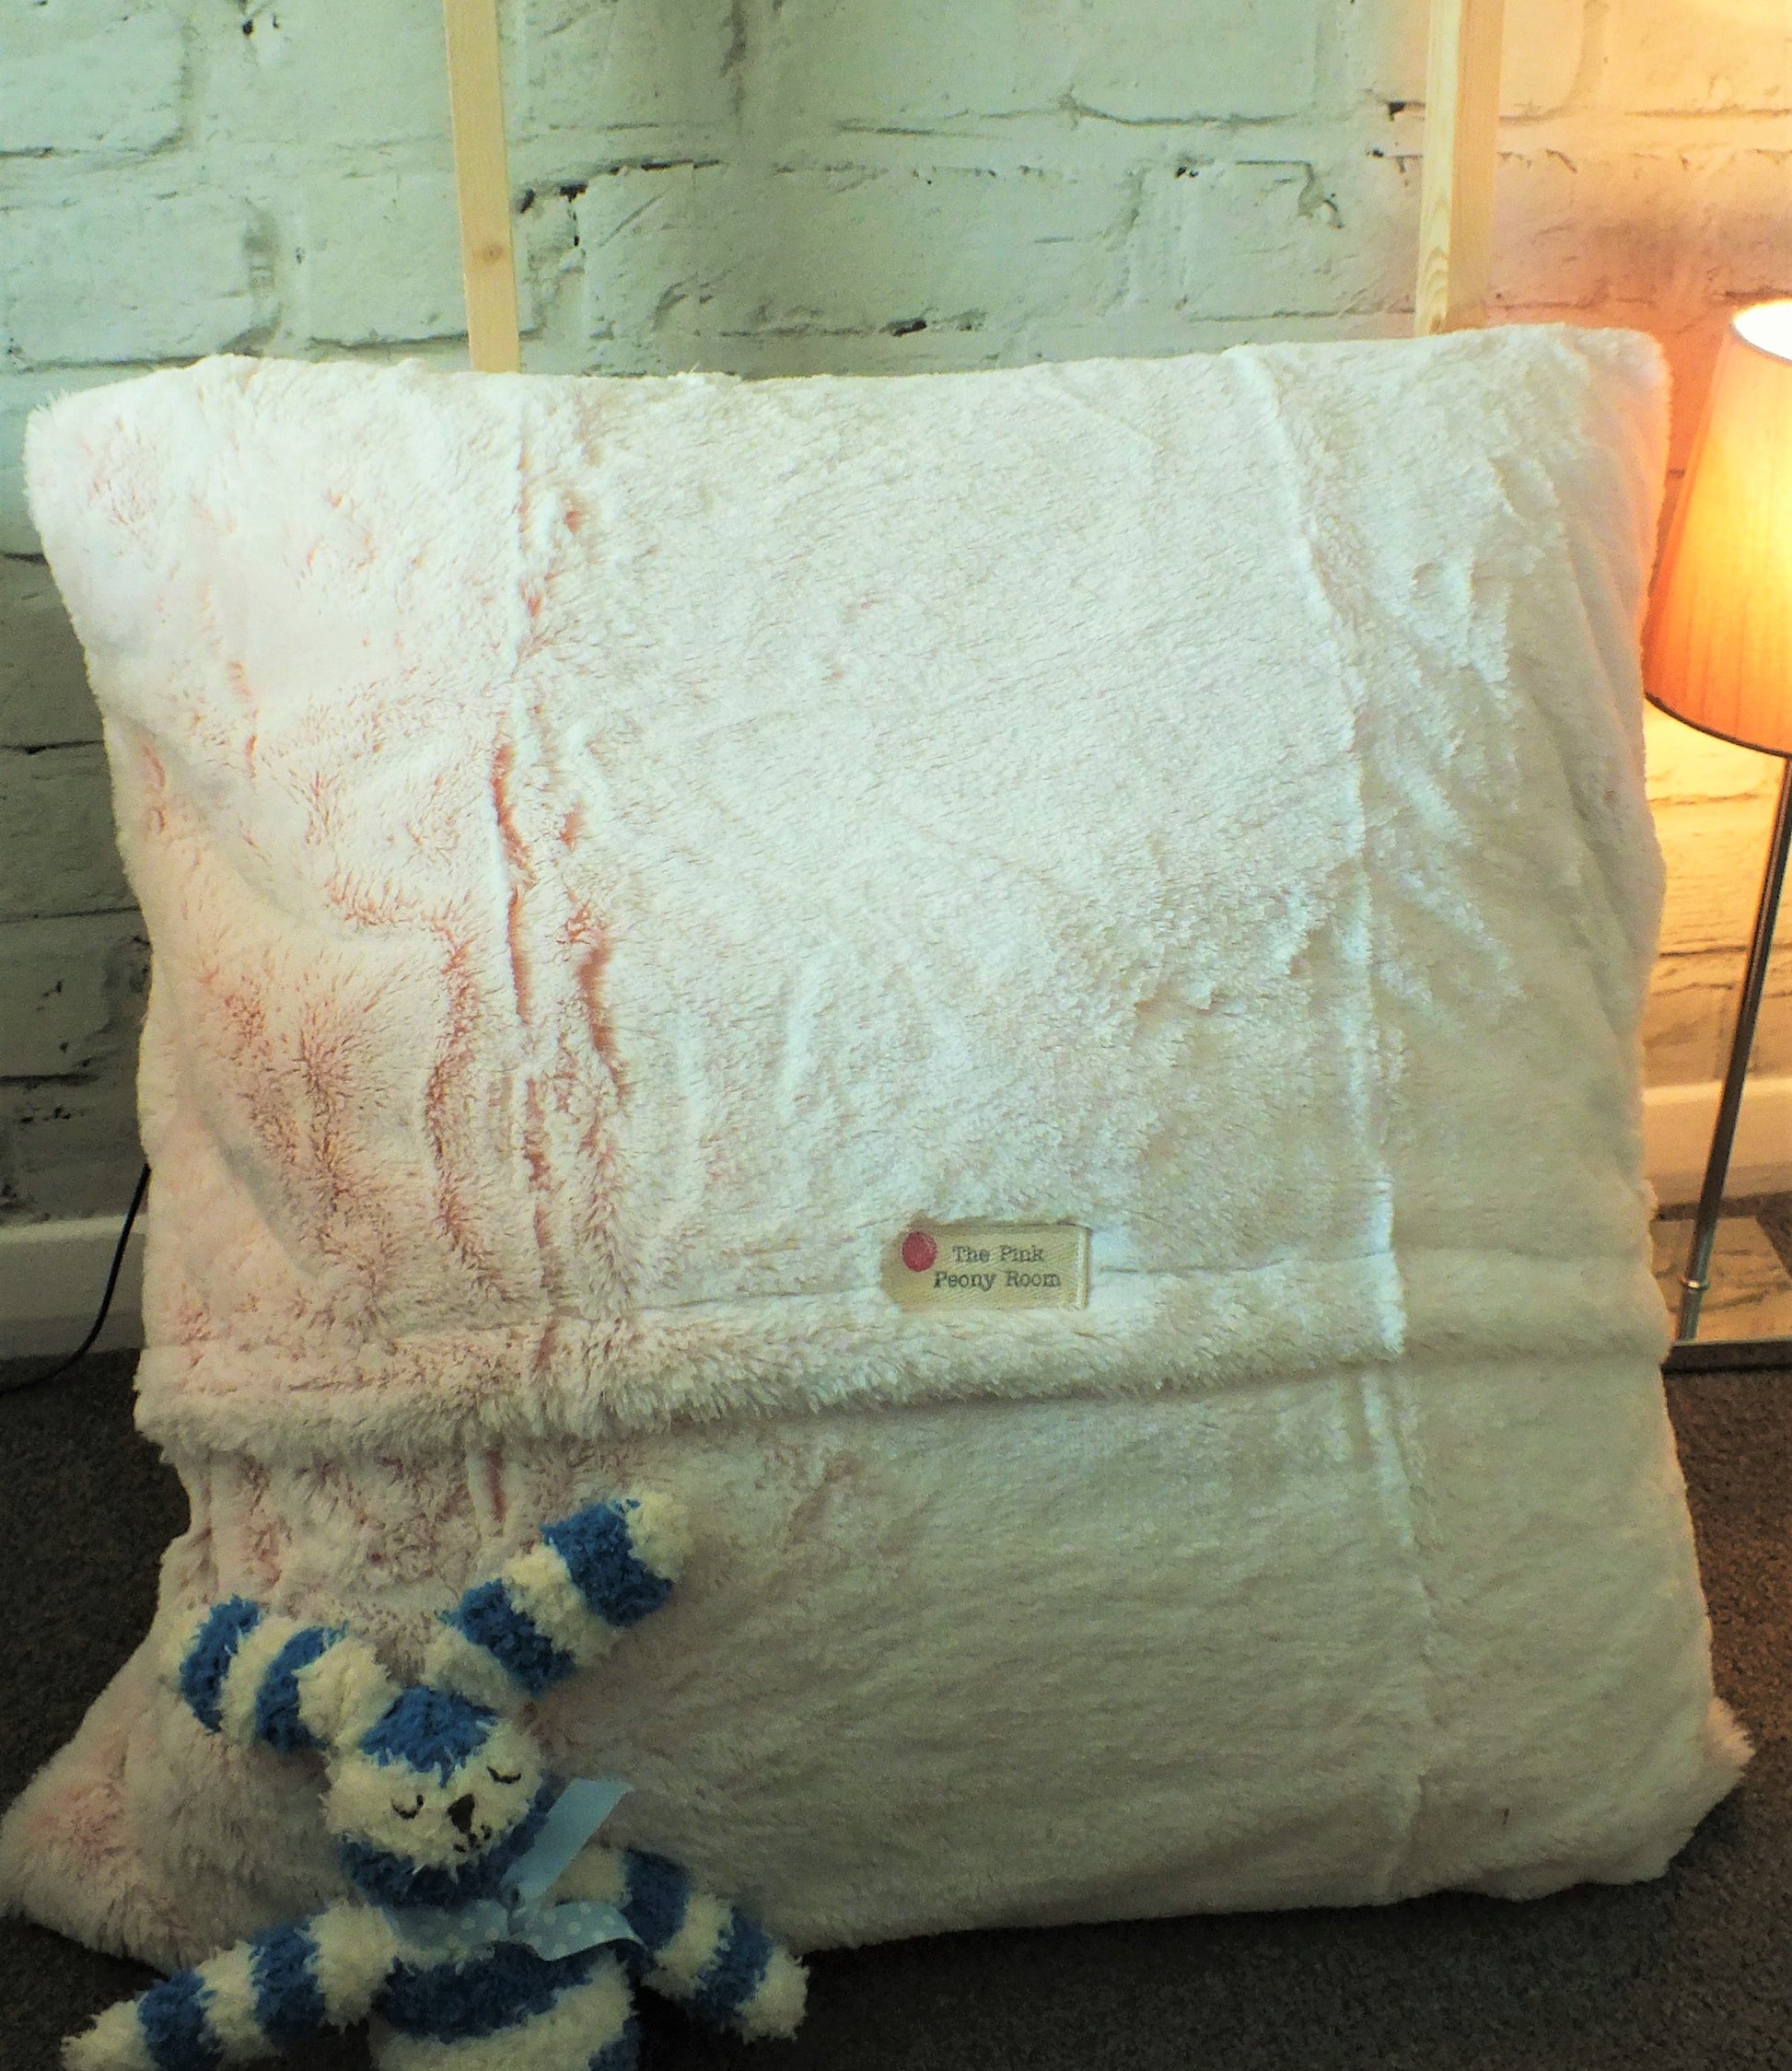 Large Handmade Faux Fur or Sheepskin Floor Cushion perfect for a childs bedroom, great for lounging on while reading making their room all cosy